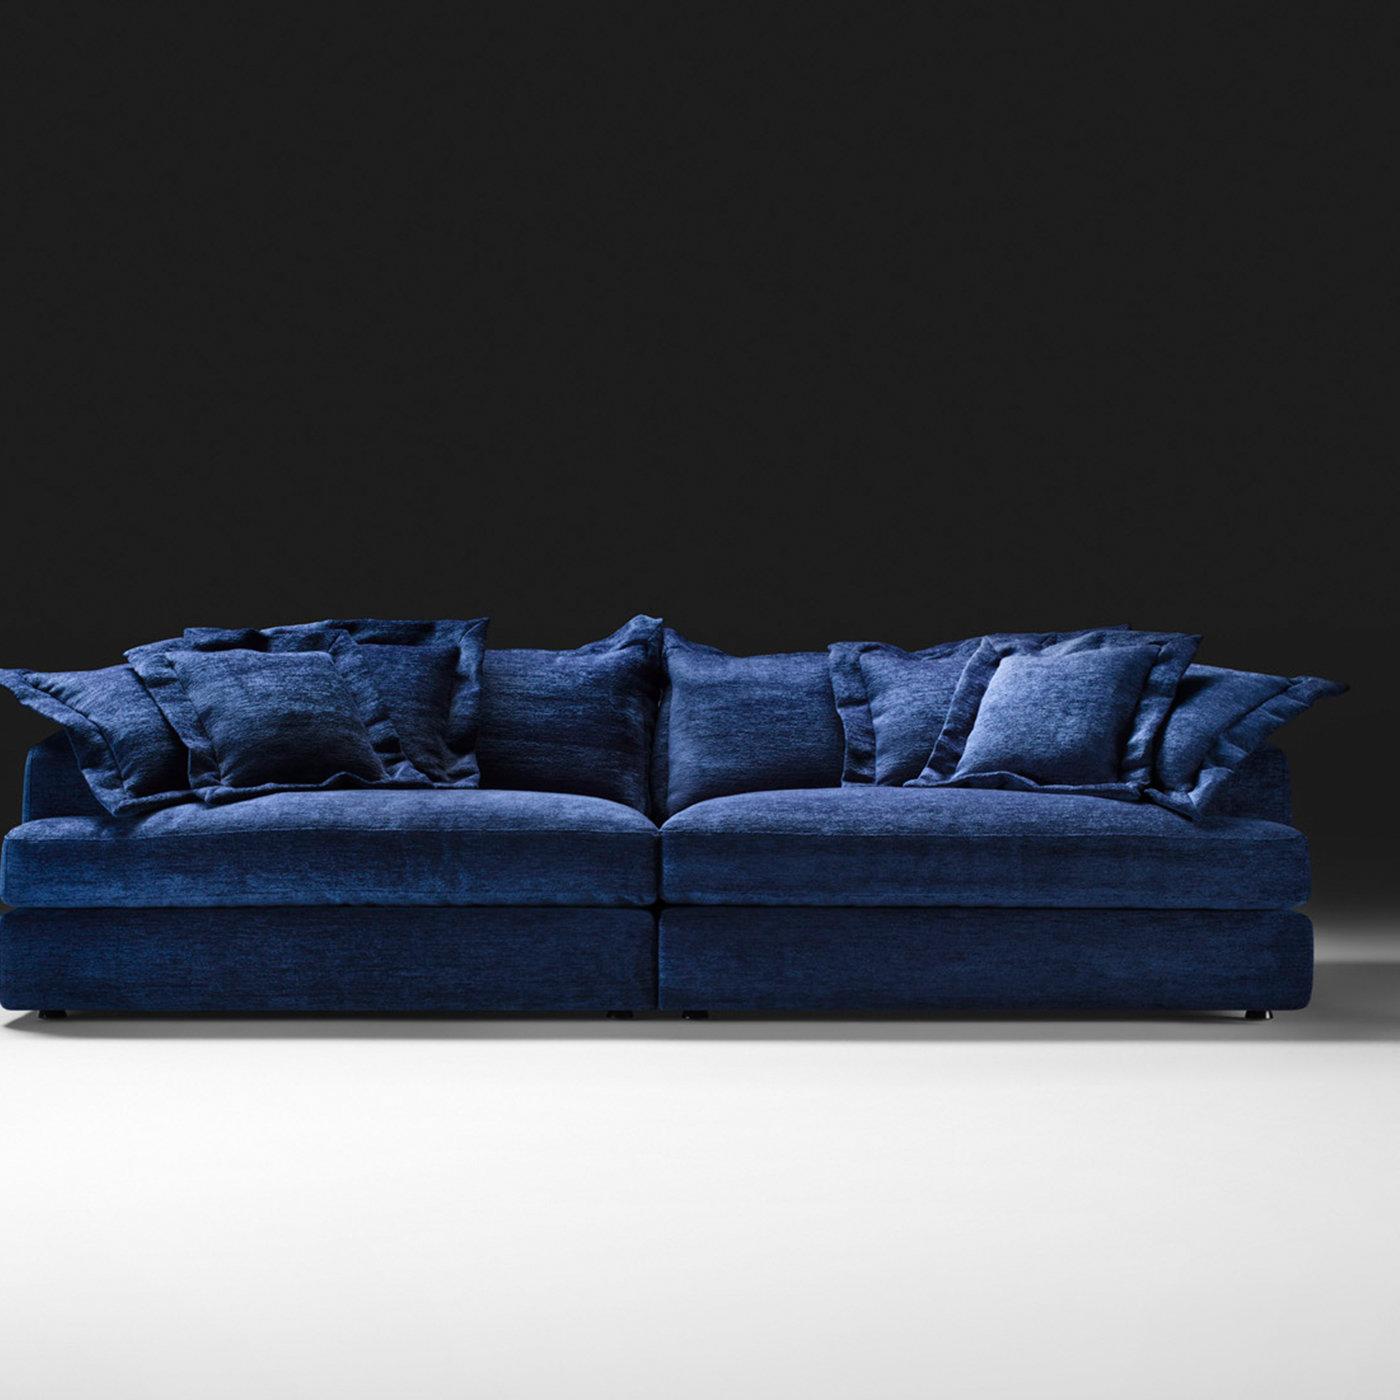 This sofa has a captivating allure that exudes extreme and unique comfort. The structure combines fine materials such as poplar and fir, and is equipped with an elastic belt spring system and padded with multi-density and highly-resistant